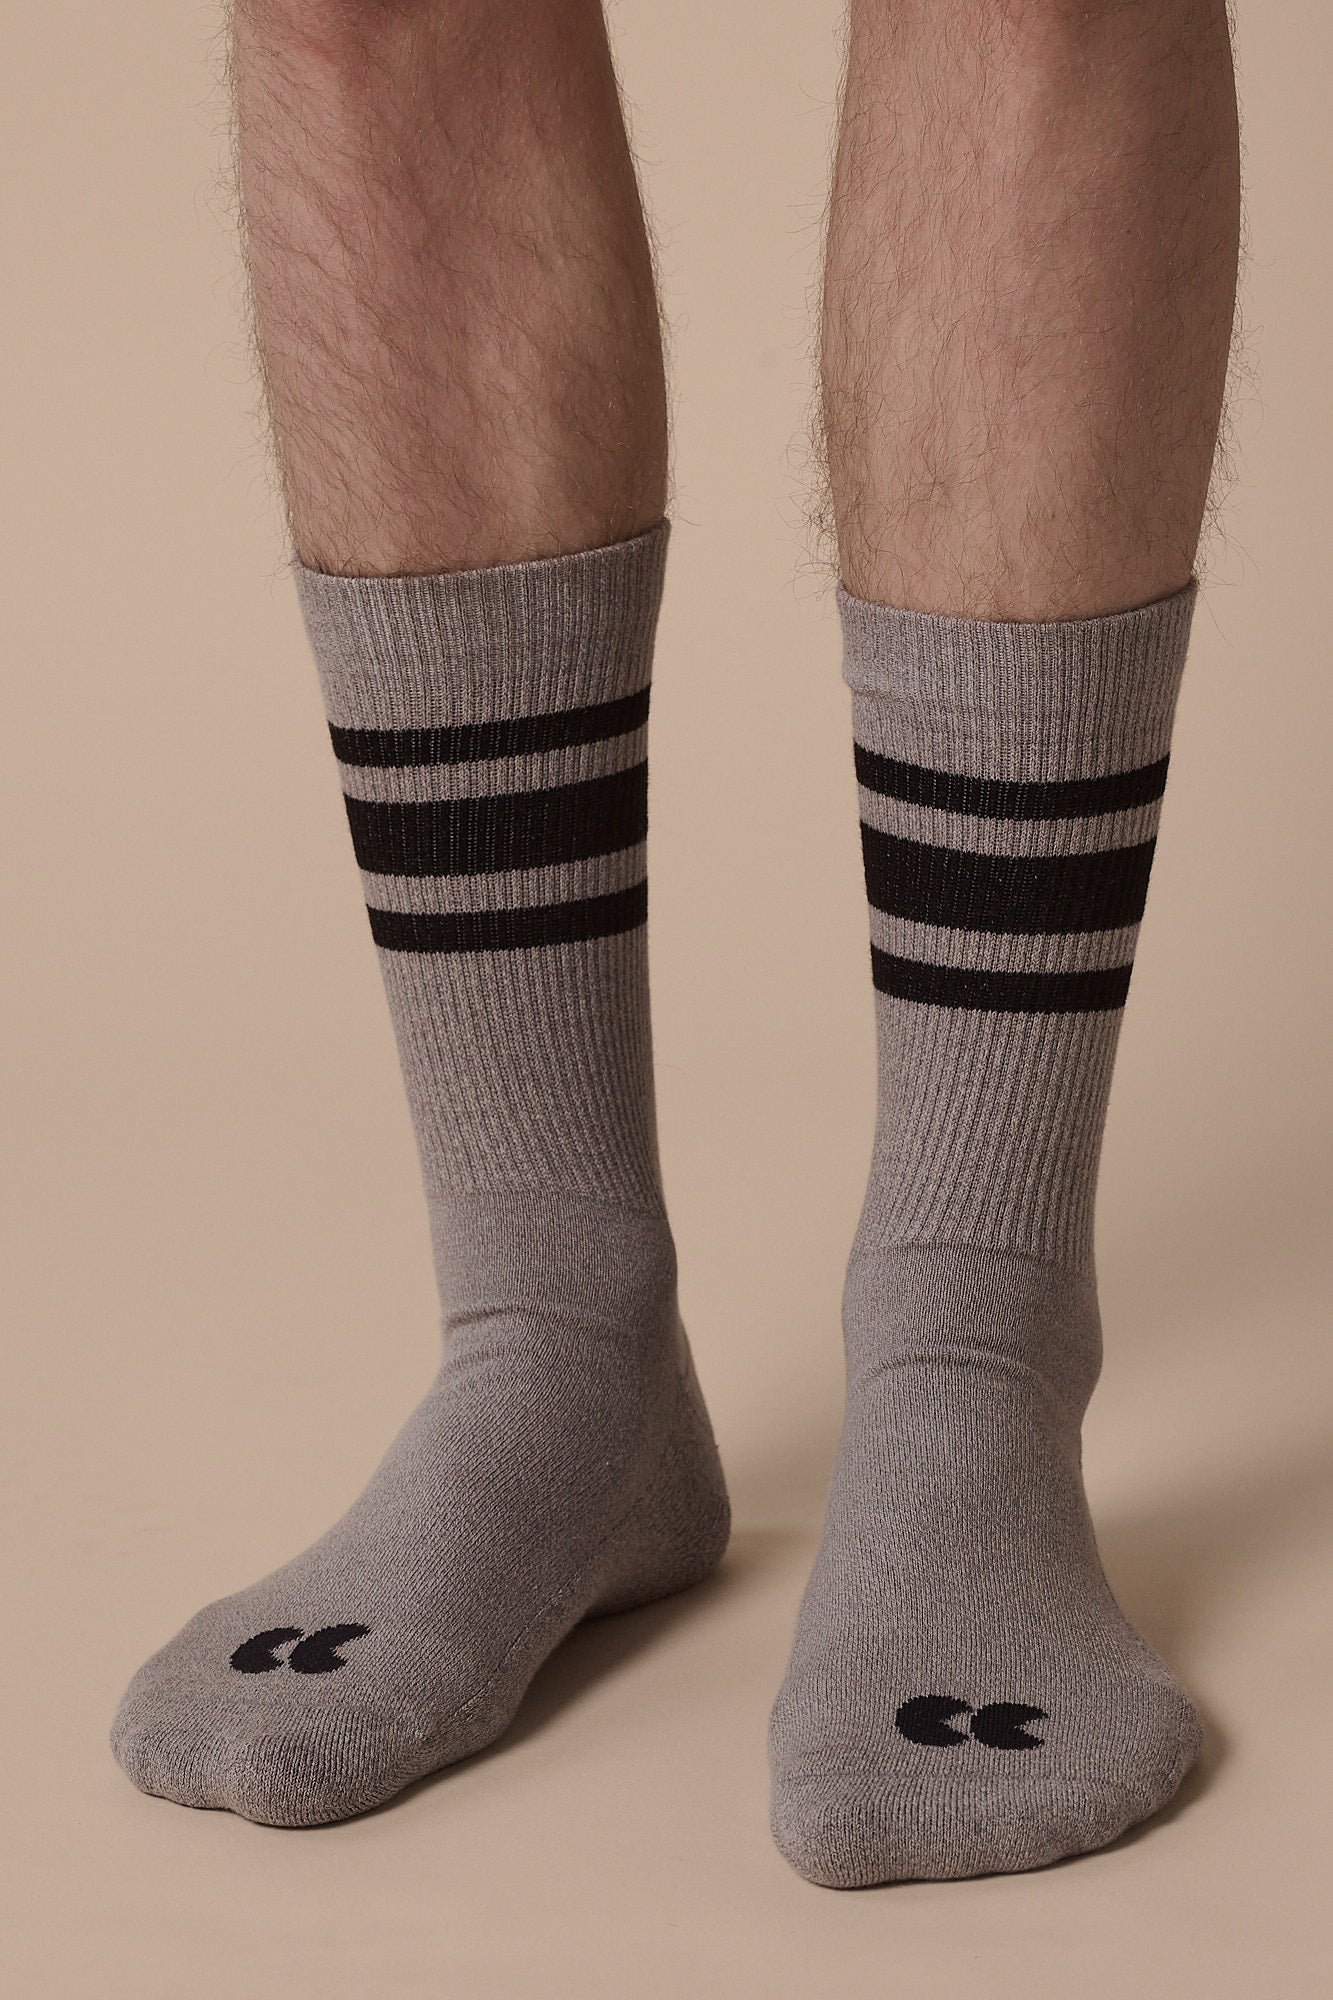 Unisex sports cotton sock calf 3 pack grey with black stripe and CC logo on toe